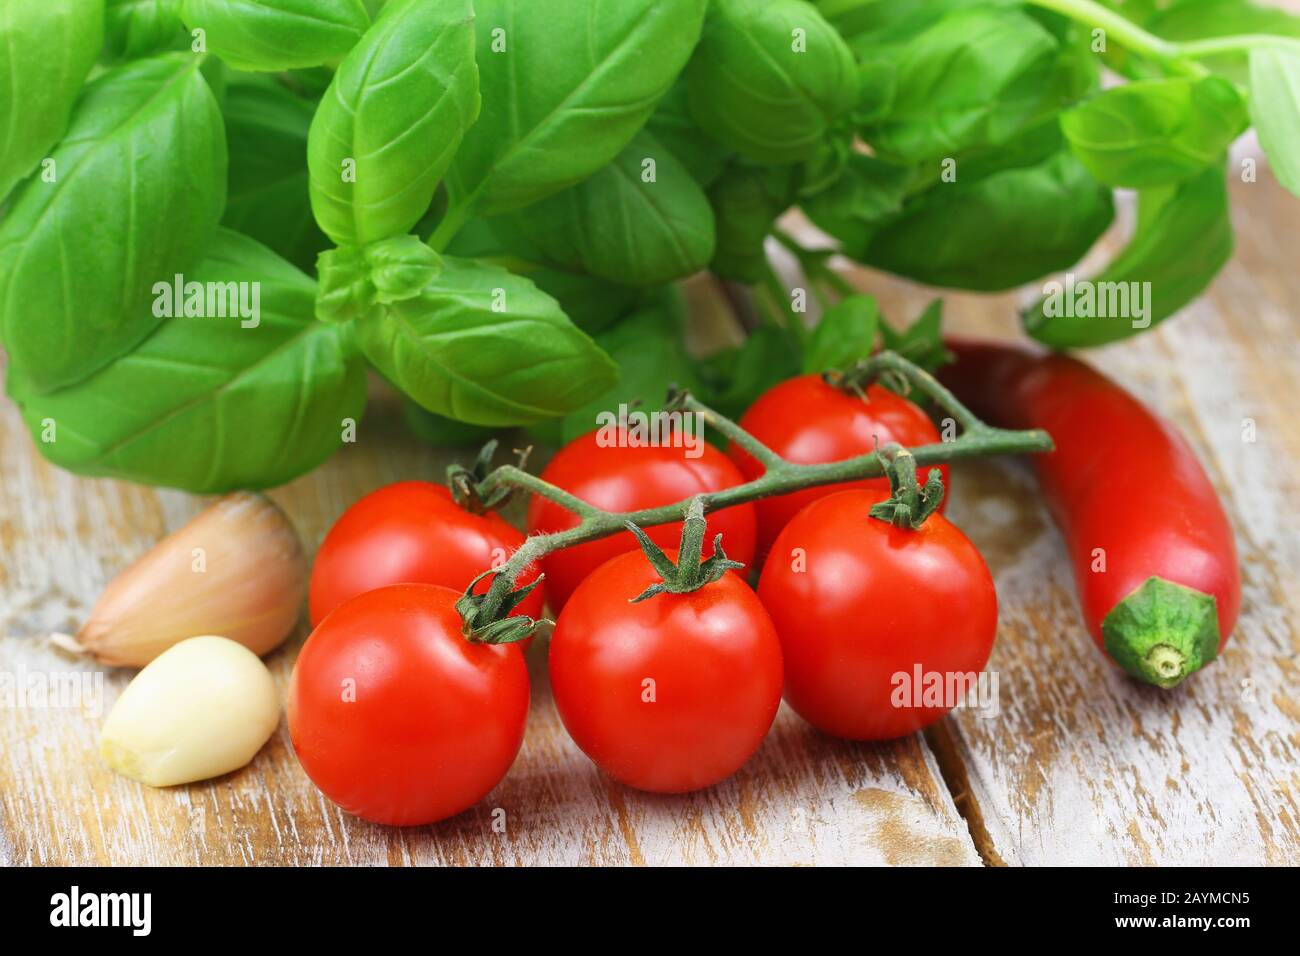 Ingredients for perfect pasta: ripe cherry tomatoes, garlic cloves and fresh basil leaves and chilli on rustic wooden surface Stock Photo